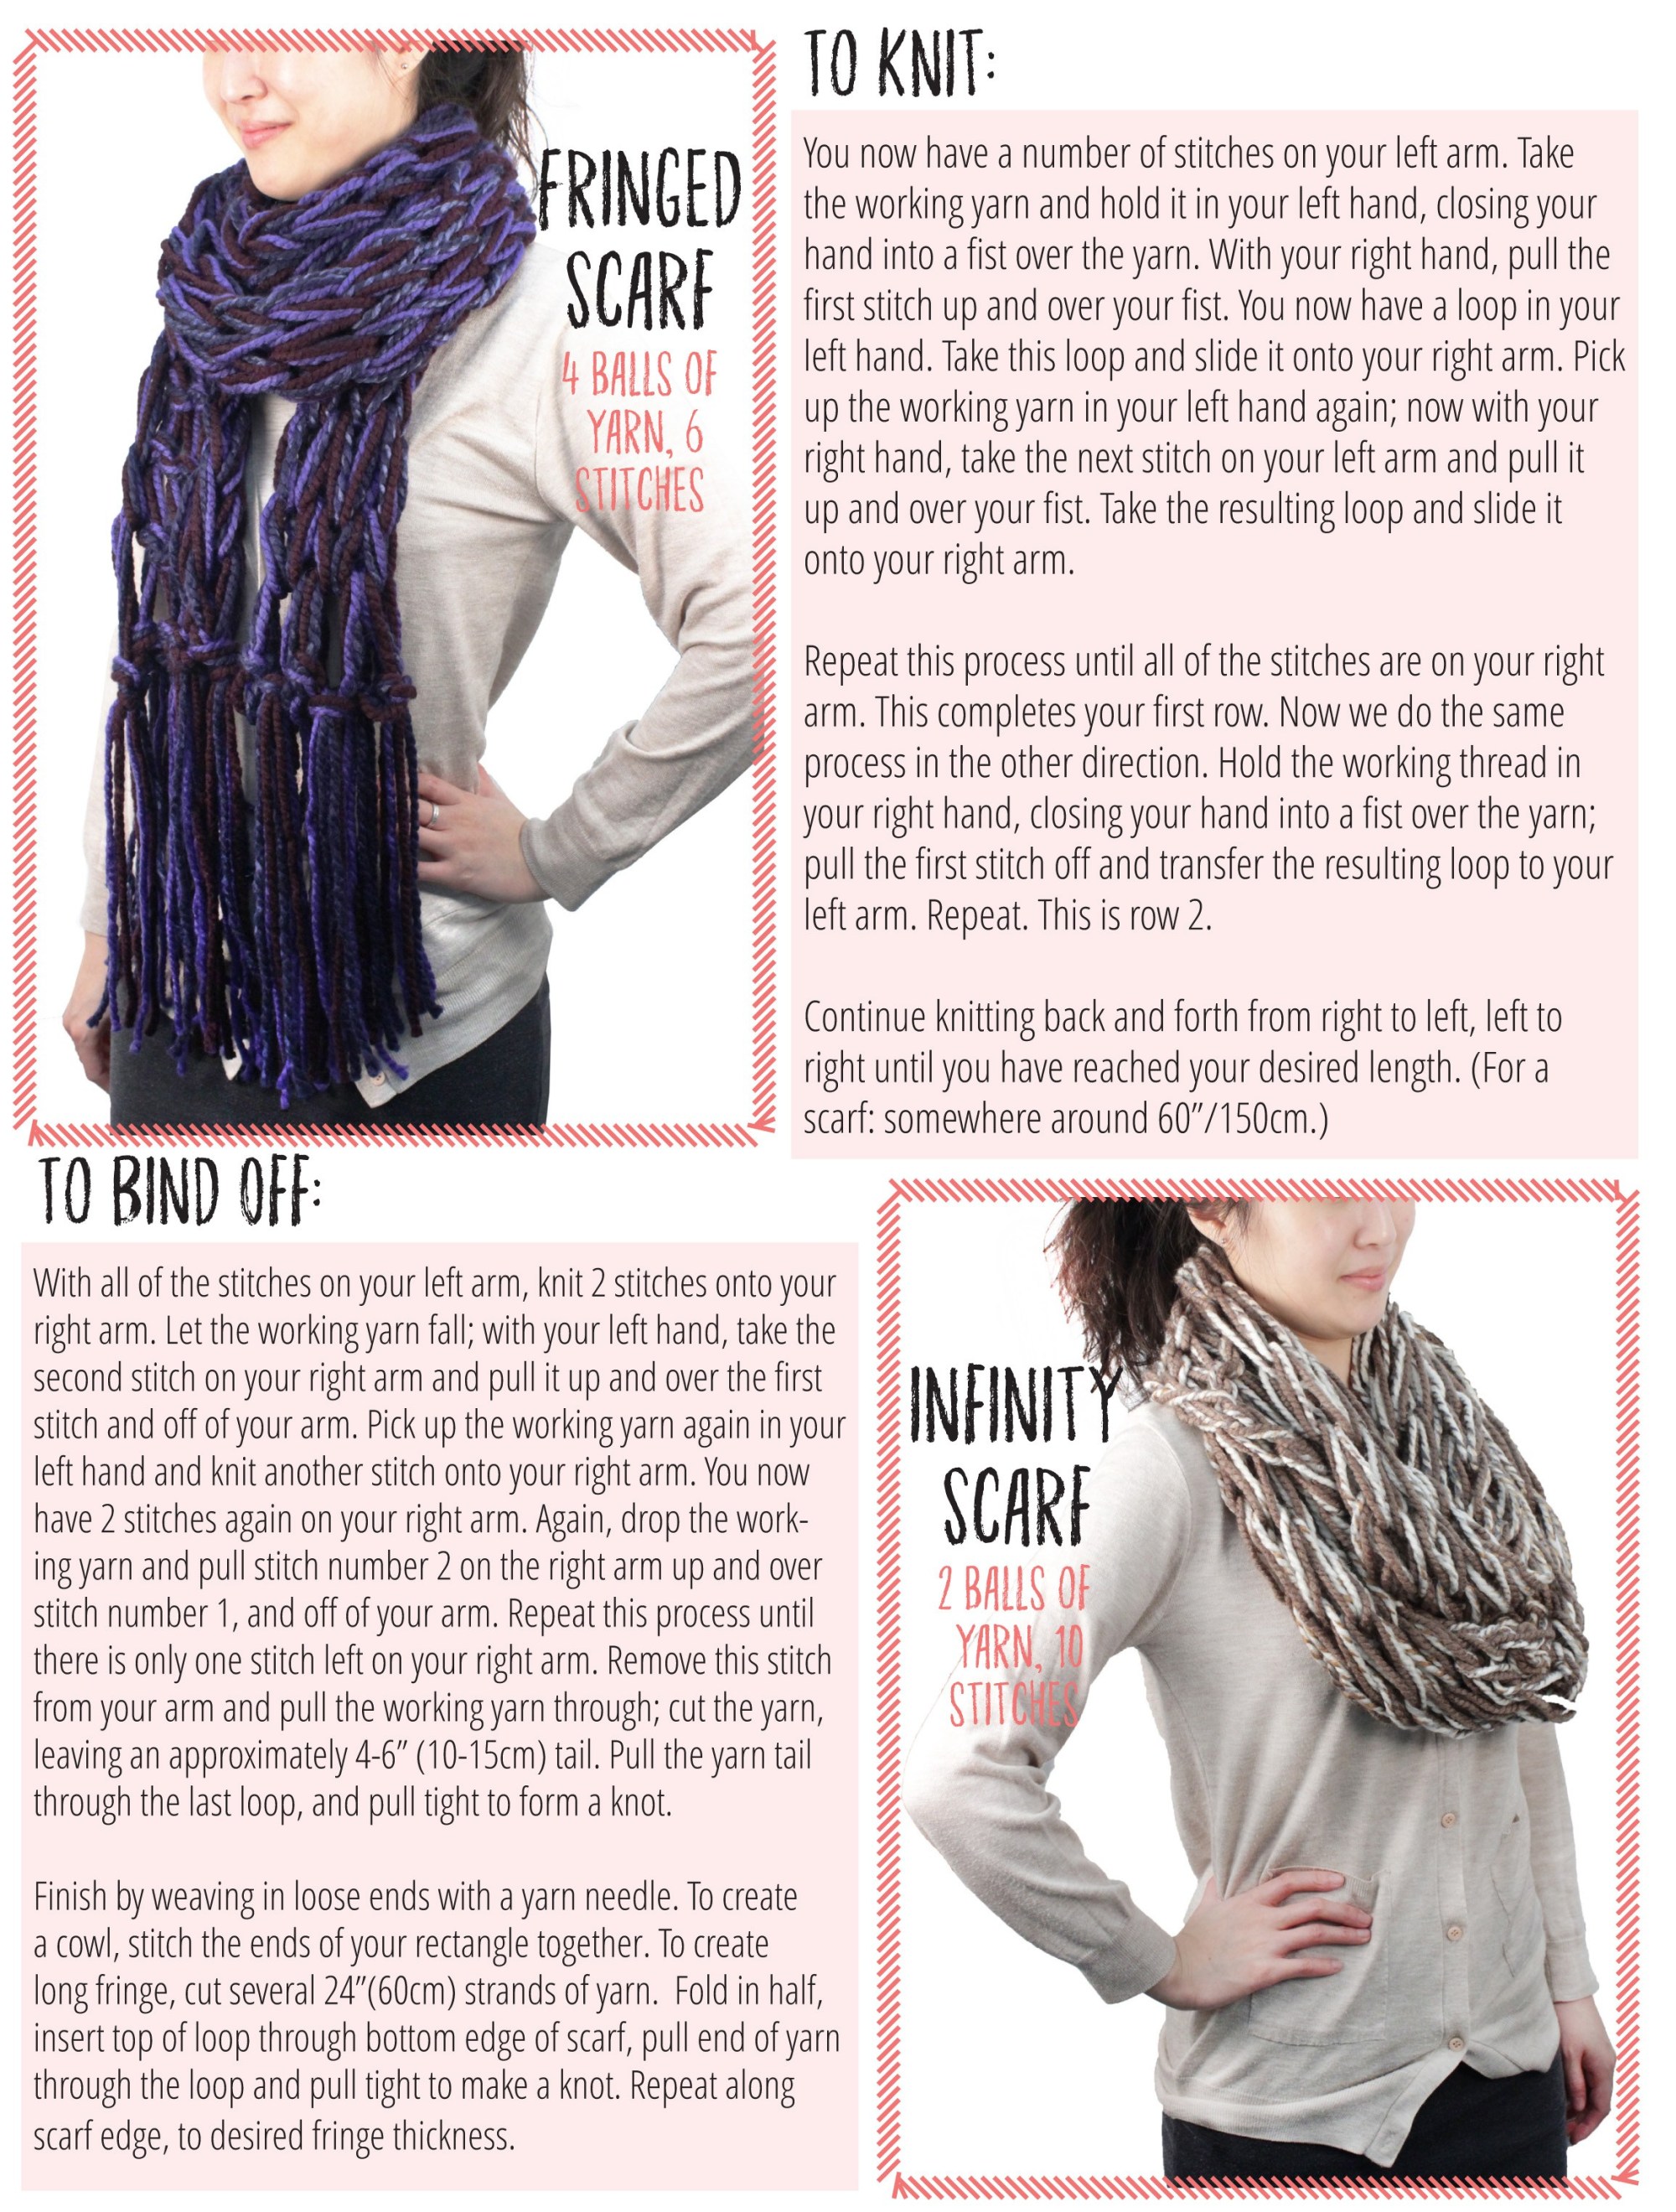 Instructions to create fringed scarf, infinity scarf, how to knit & how to bind off